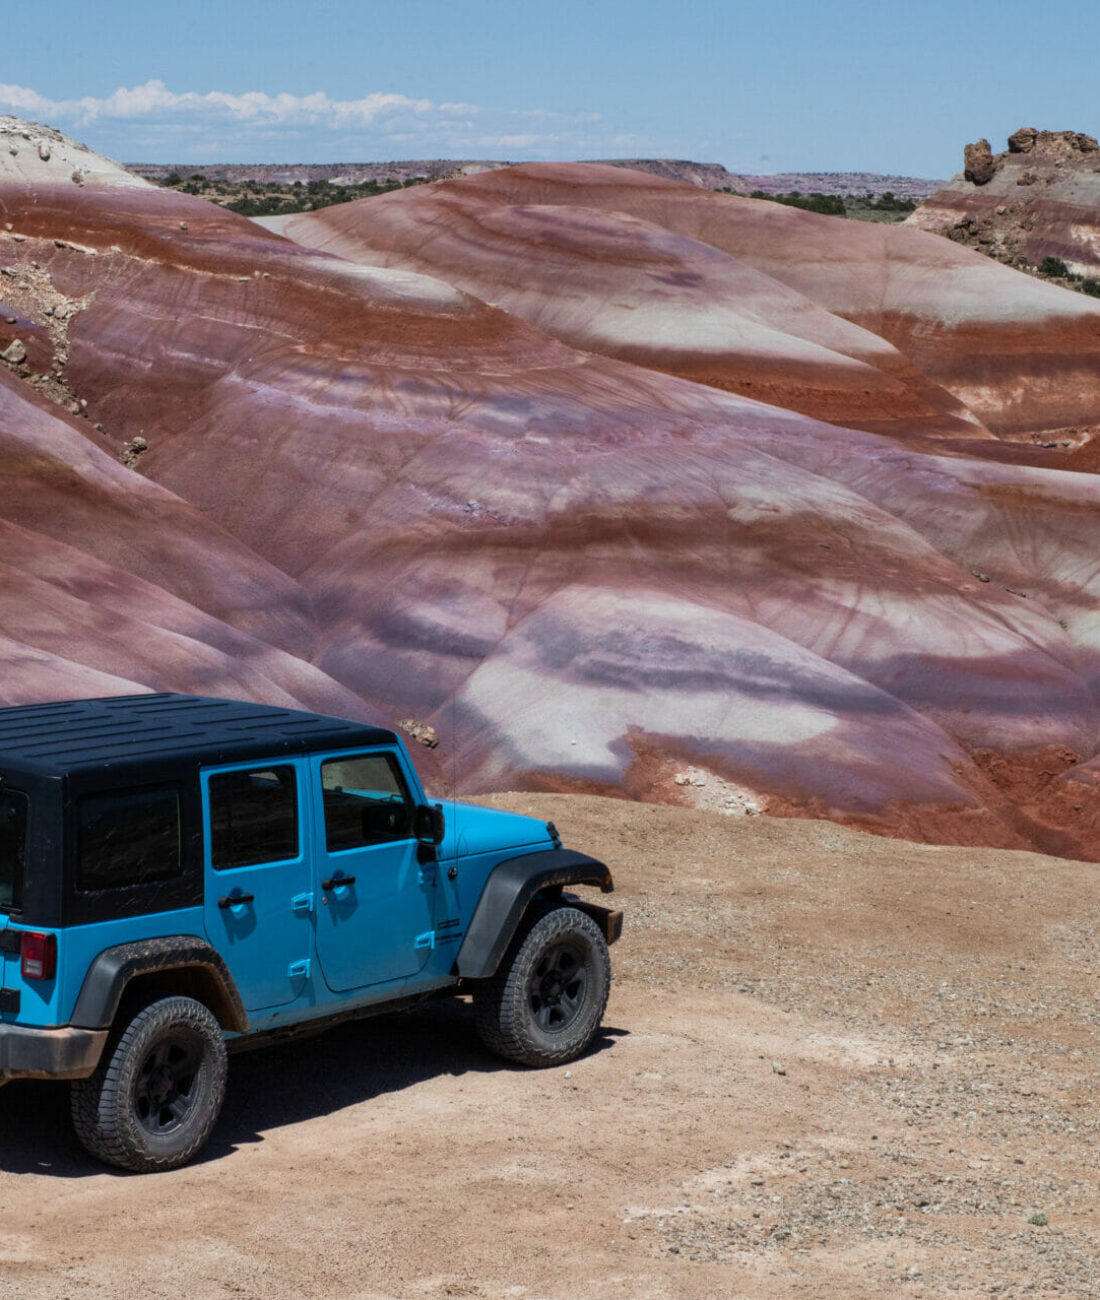 bentonite hills cathedral valley jeep tour adventure 4x4 guides capitol reef utah